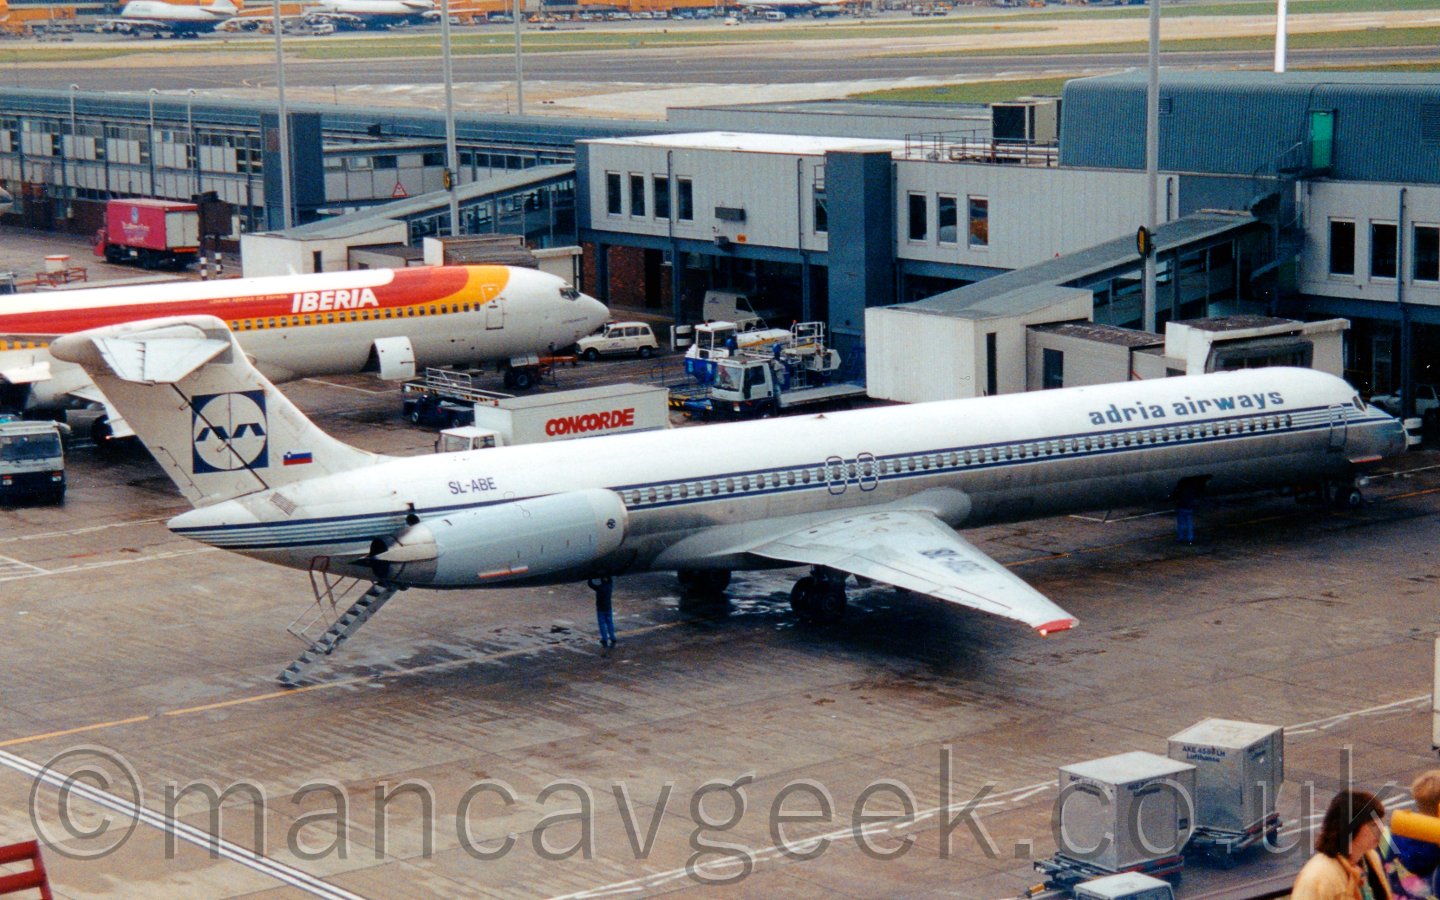 Side view of a white and blue, twin engined jet airliner with the engines mounted on the rear fuselage, parked facing to the right, with a set of buildt-in airstairs deployed from the rear, between the engines, in front of a terminal building, with a white and orange jet airliner parked next to it.